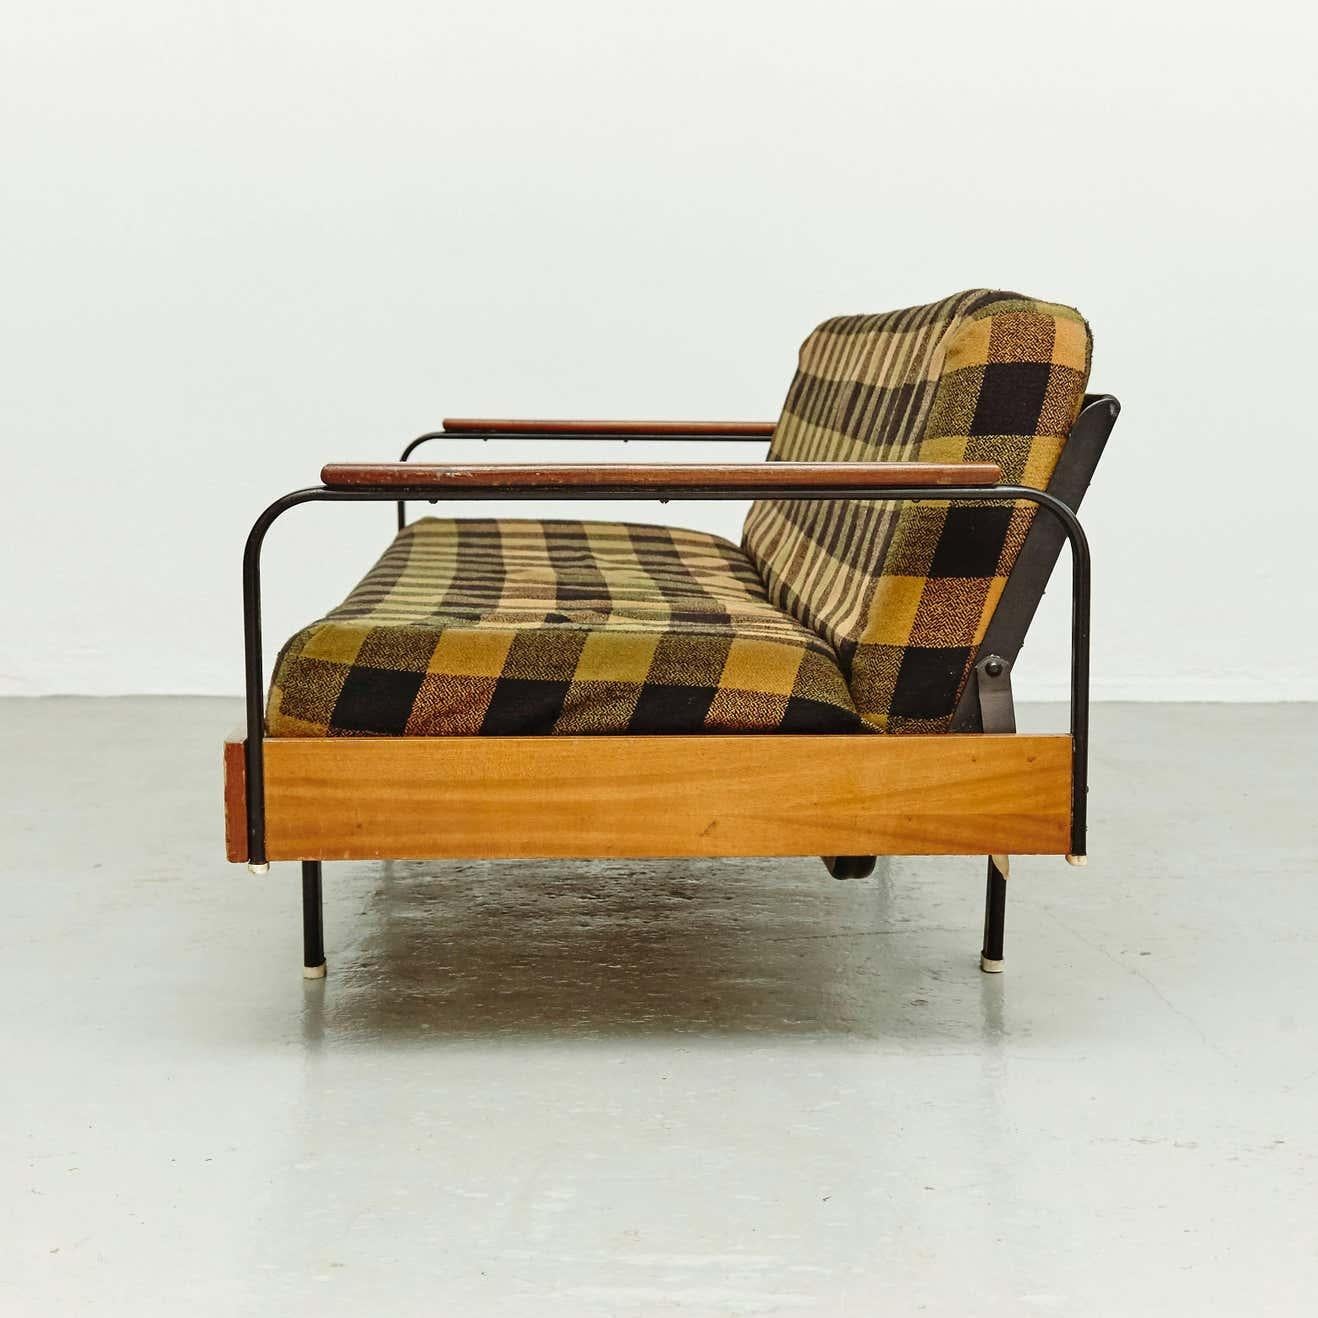 Mid-Century Modern French Sofa after Jean Prouve, circa 1950 For Sale